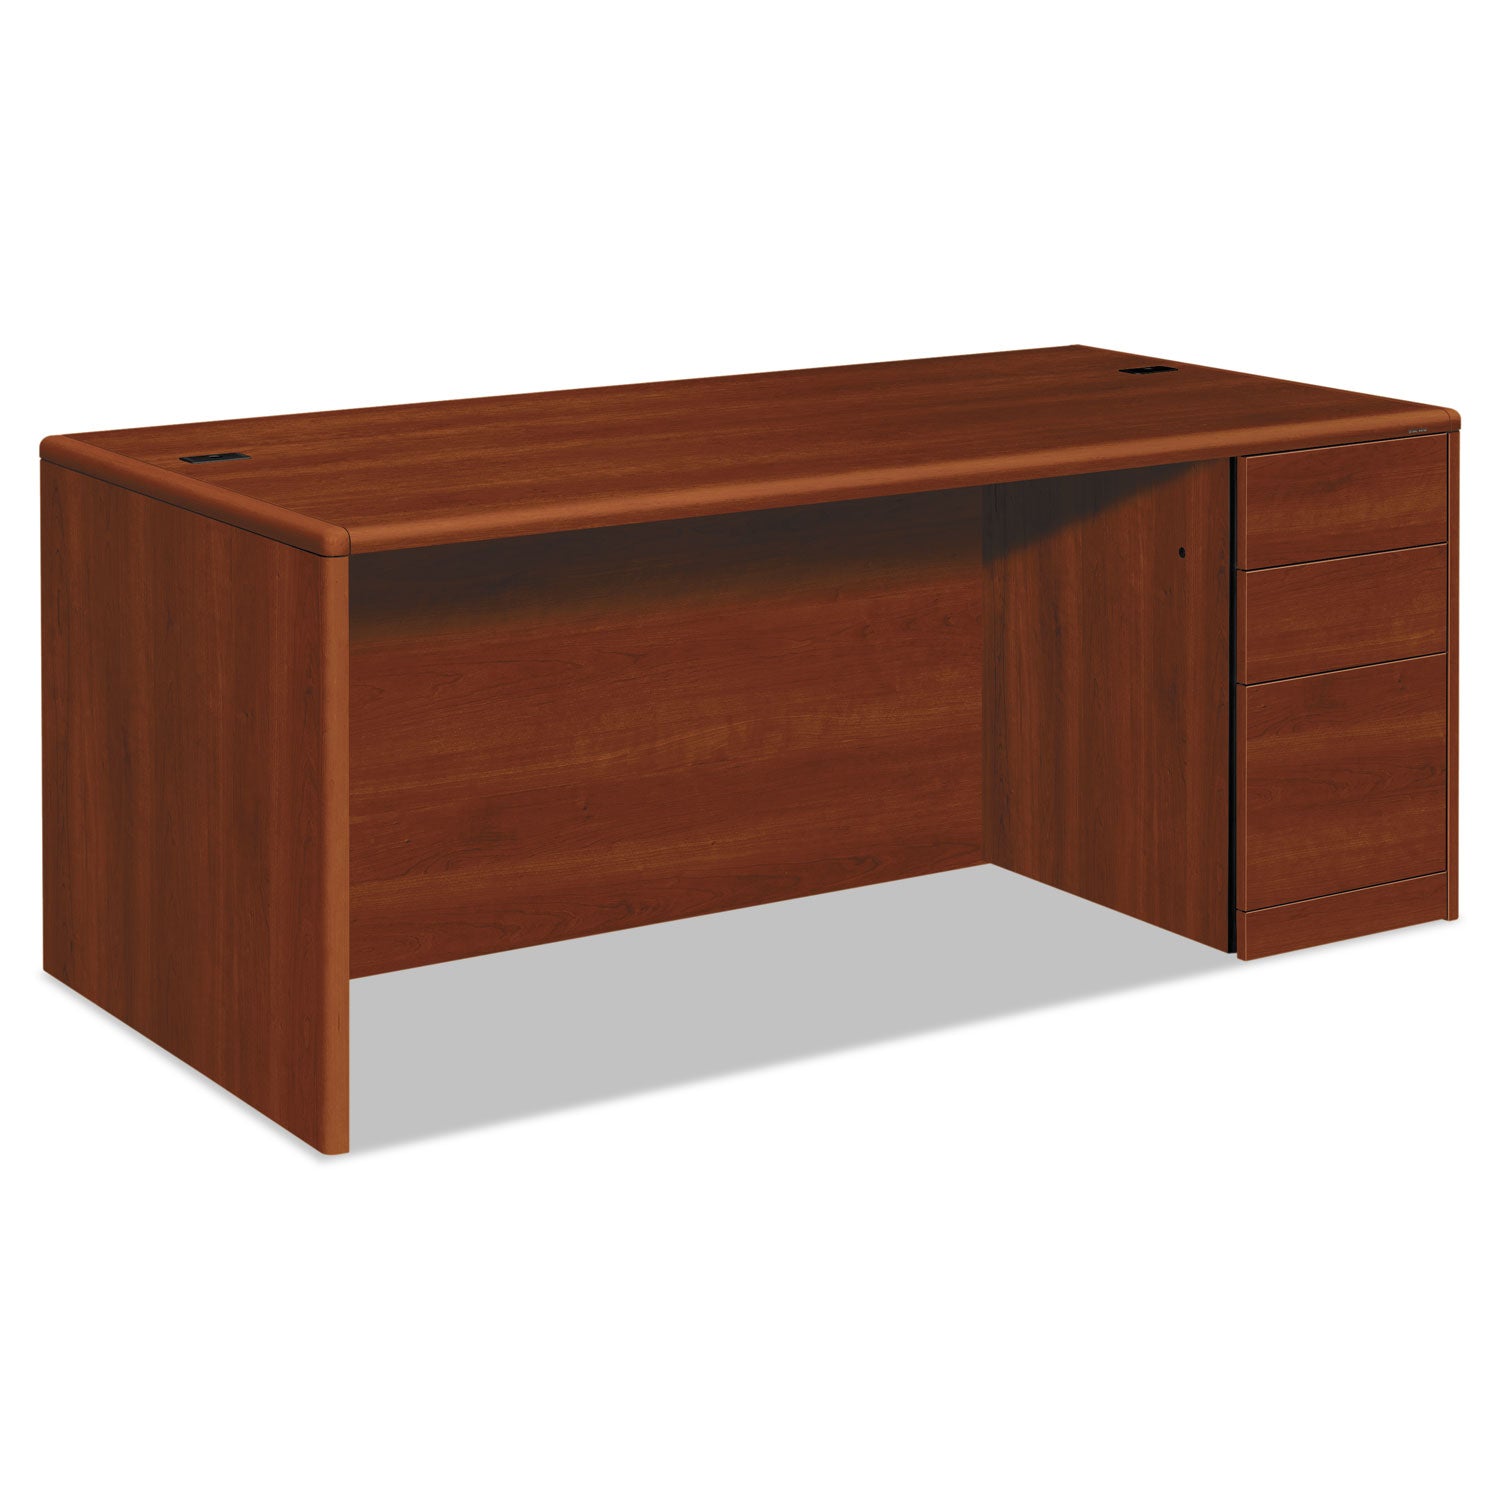 10700 Series Single Pedestal Desk with Full-Height Pedestal on Right, 72" x 36" x 29.5", Cognac - 